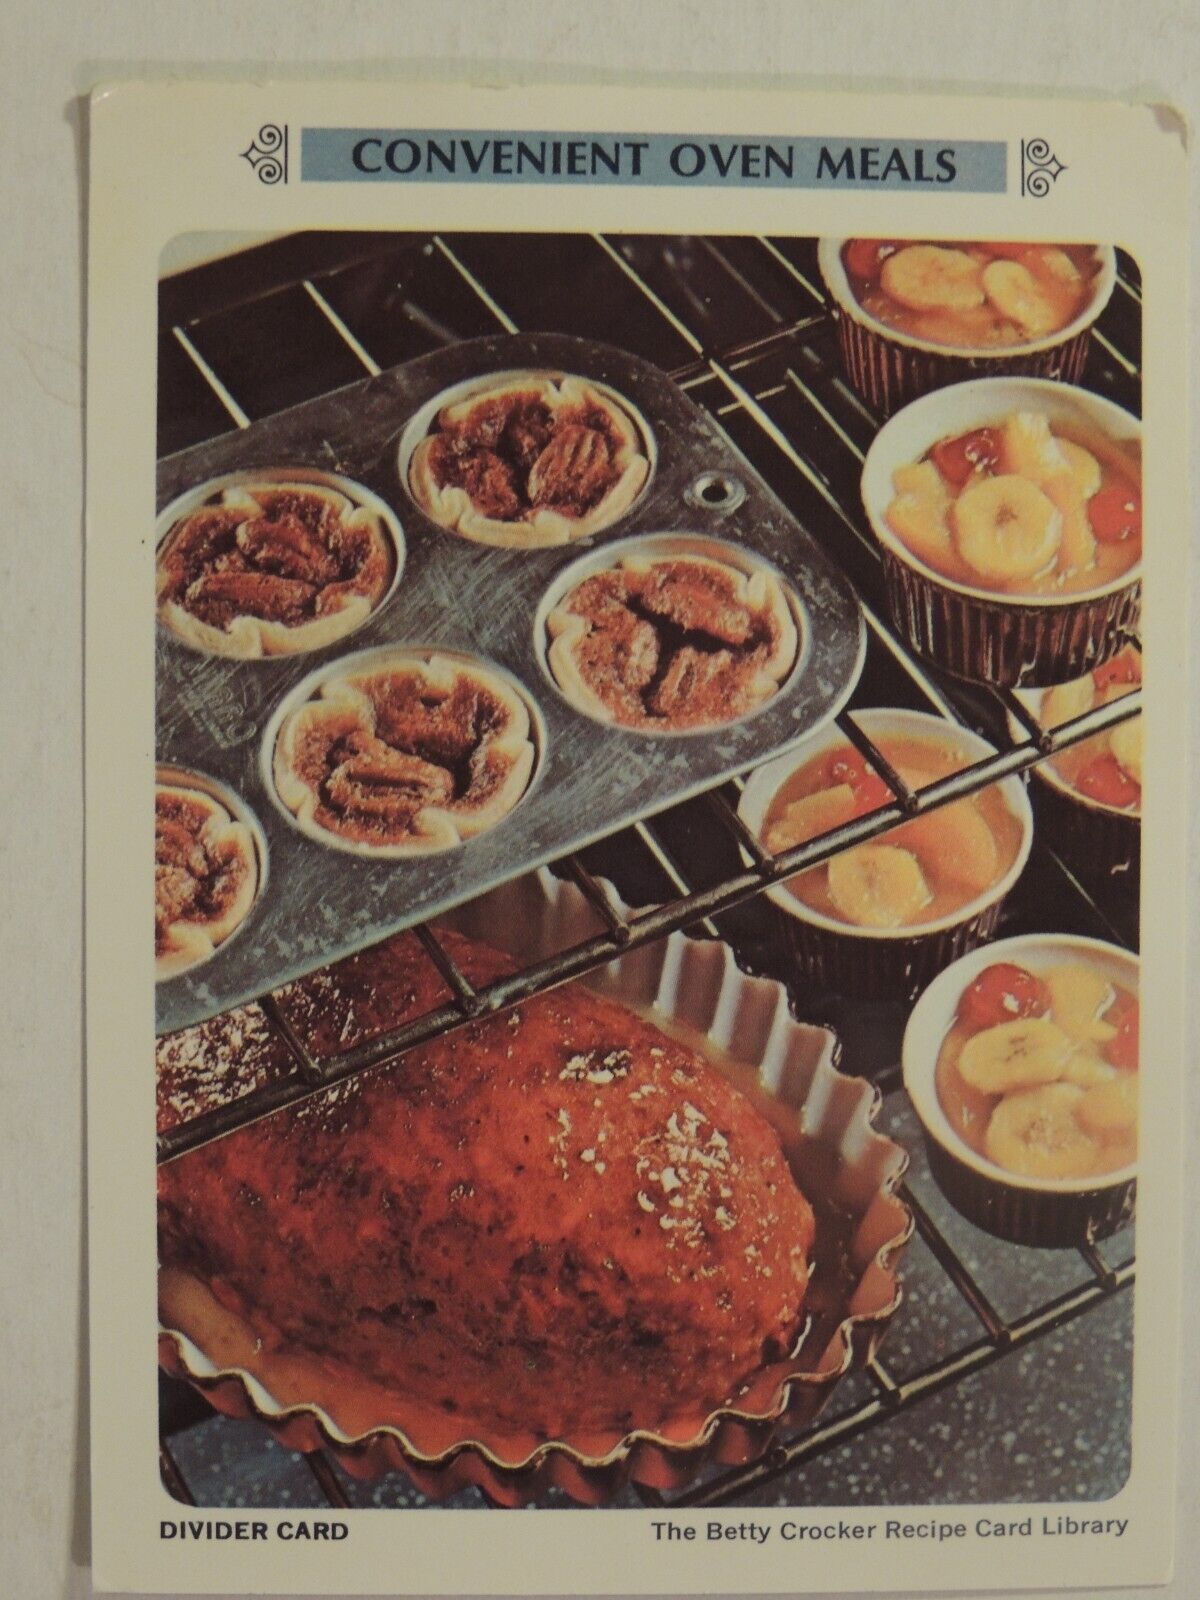 The Betty Crocker Recipe Card Library 1971 CARDS:  CONVENIENT OVEN MEALS